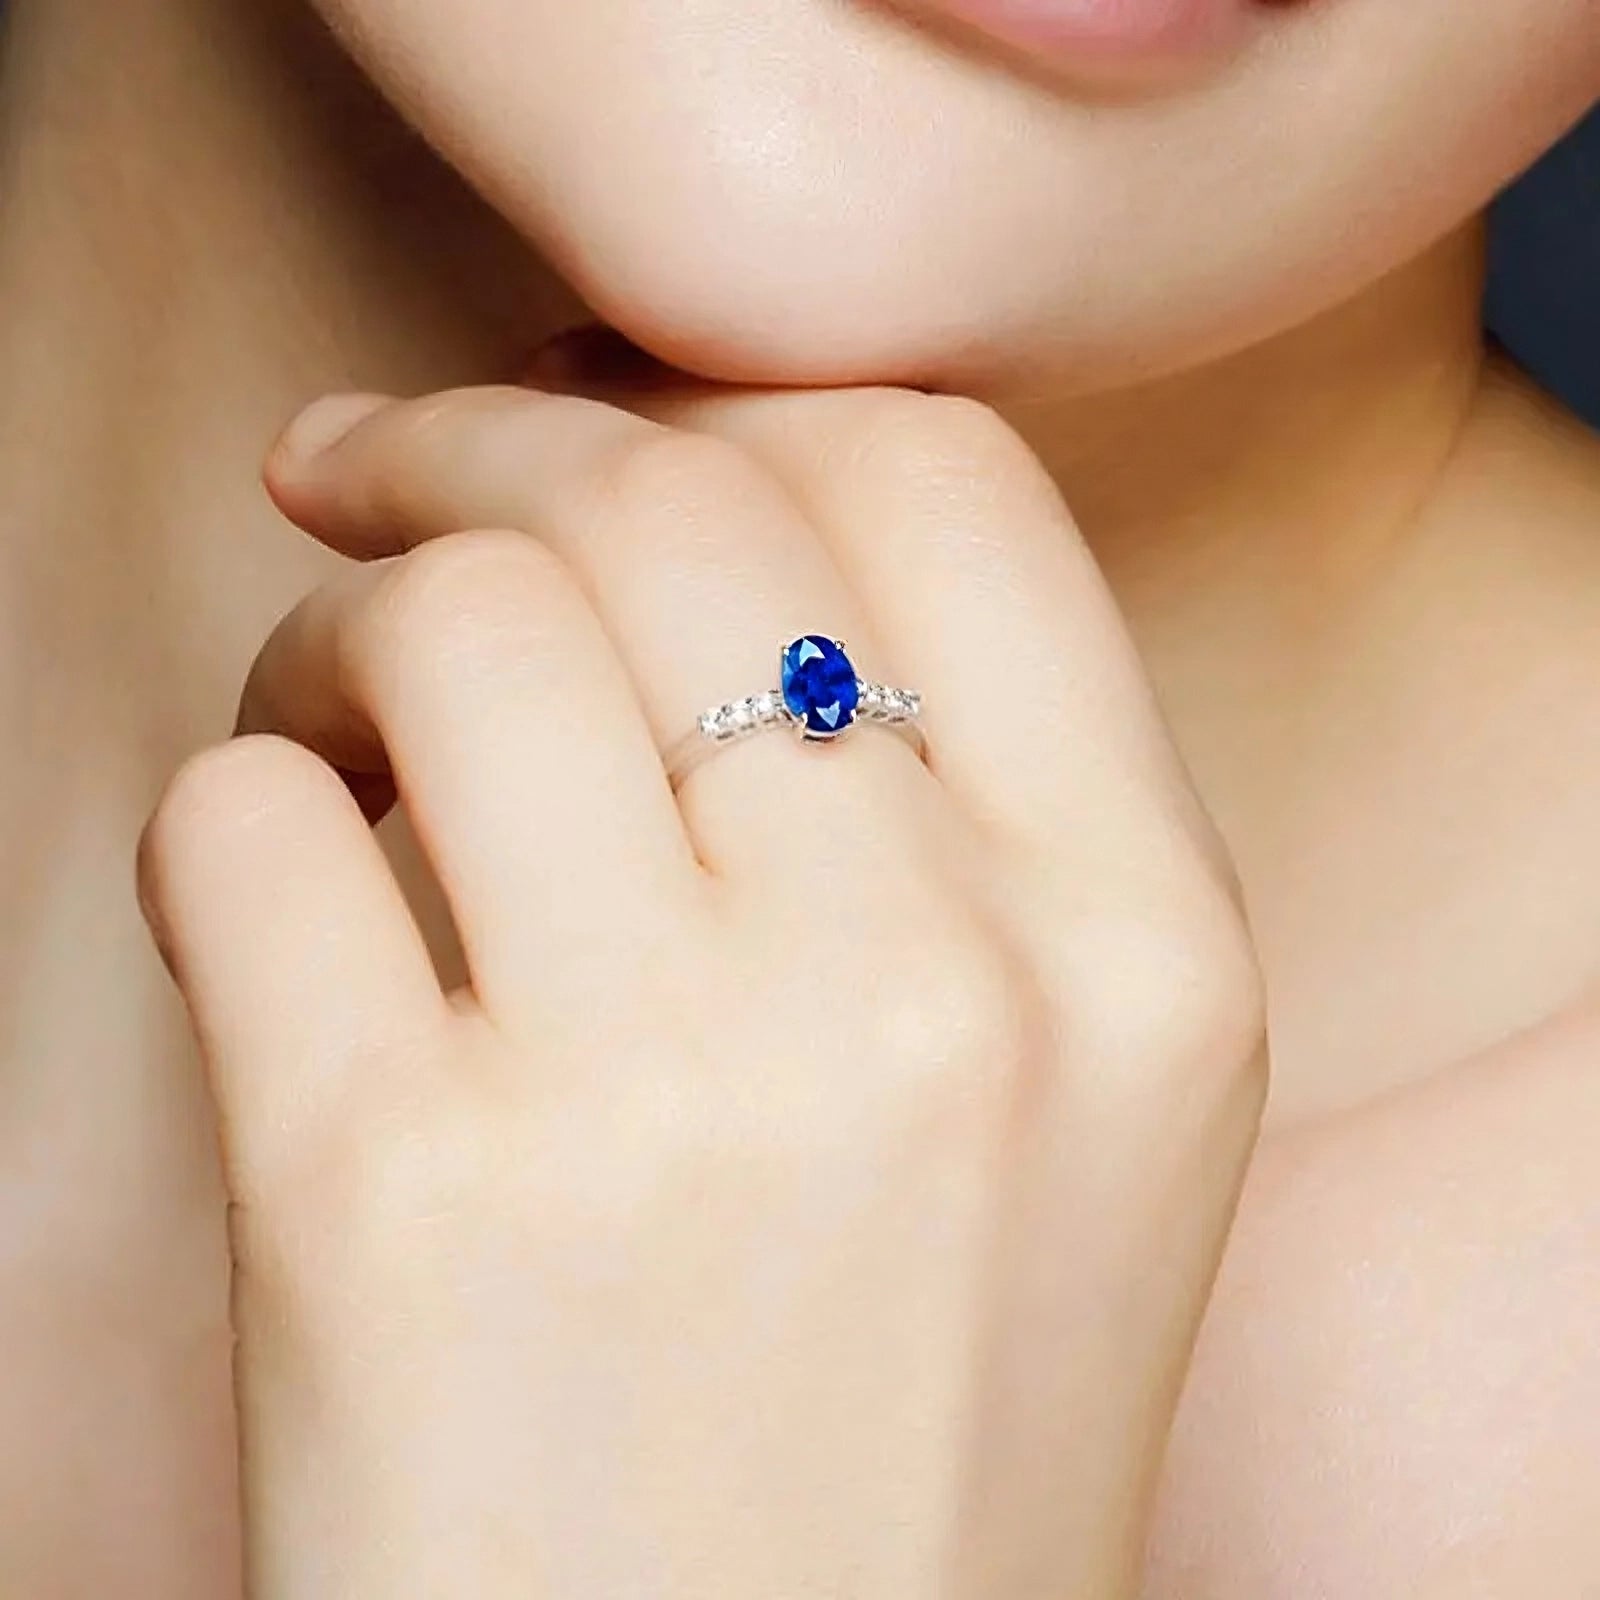 Natural Oval Shape Blue Sapphire Engagement Ring in 14k Gold / Genuine  Sapphire Diamond Statement Ring / Gift For Her - Gems N Diamond